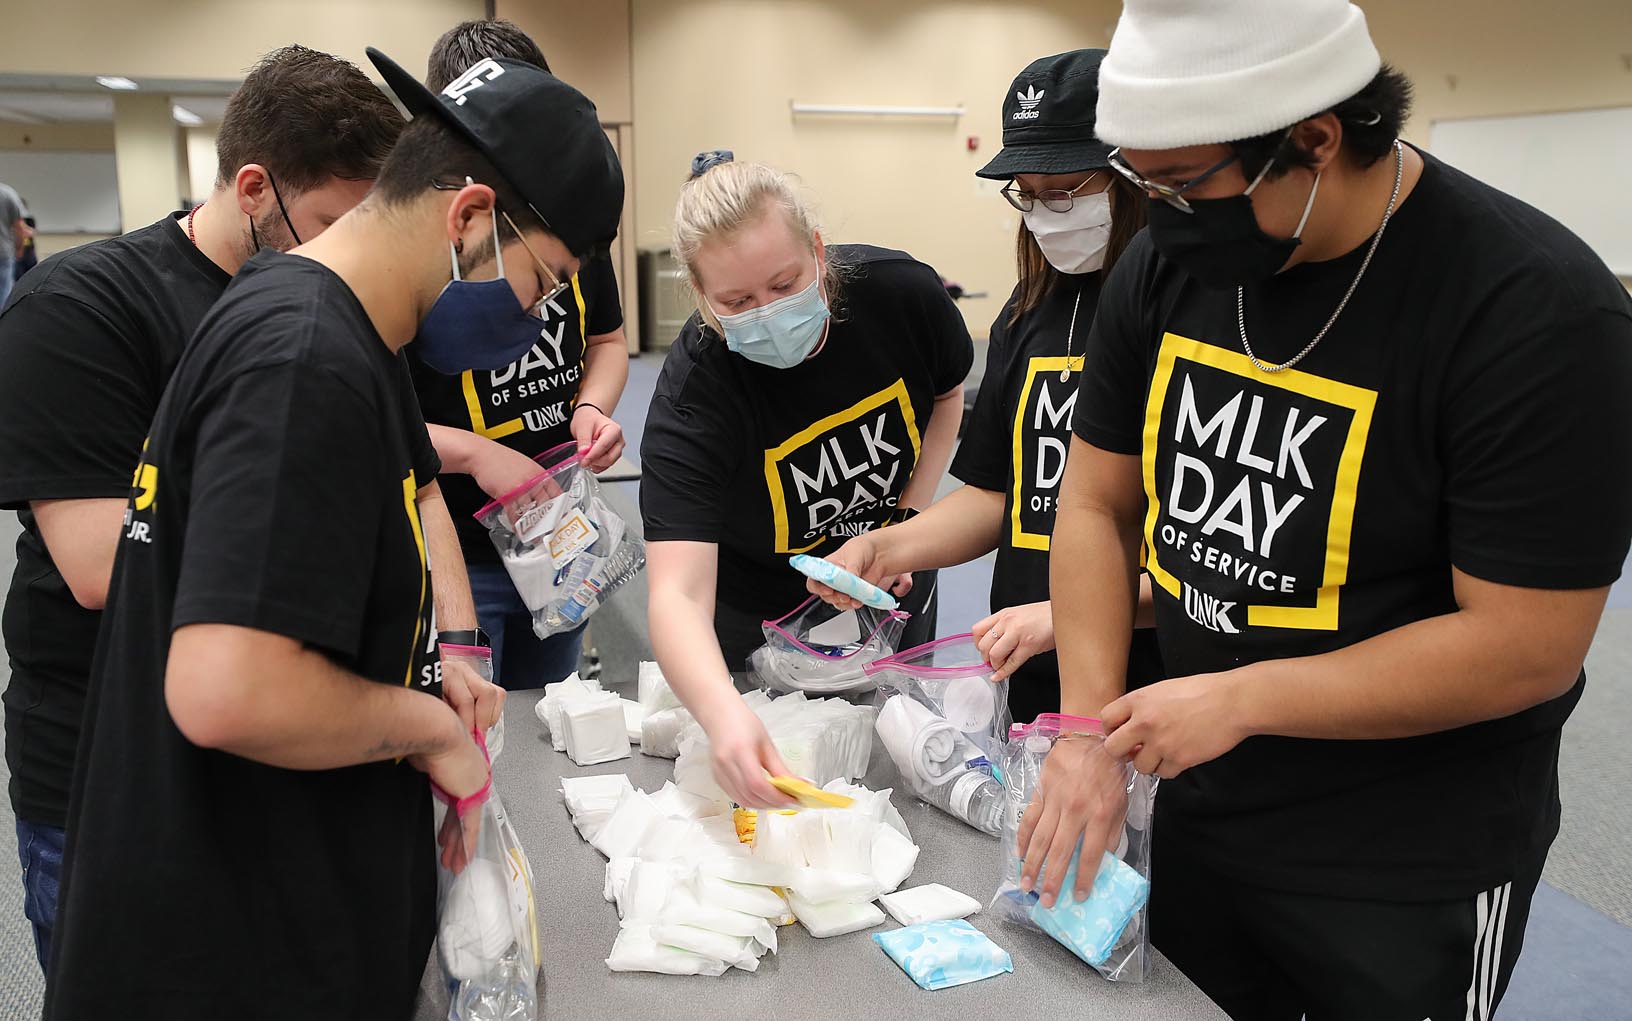 Clockwise from left, UNK students Dado Castillo, Adrian Almeida, Isaac McDowell, Kiersten Lubke, Ana Flores and Daniel Ocampo fill care packages Friday during the MLK Day of Service. The packages will be delivered to Crossroads Mission Avenue and Kearney Jubilee Center. (Photos by Erika Pritchard, UNK Communications)